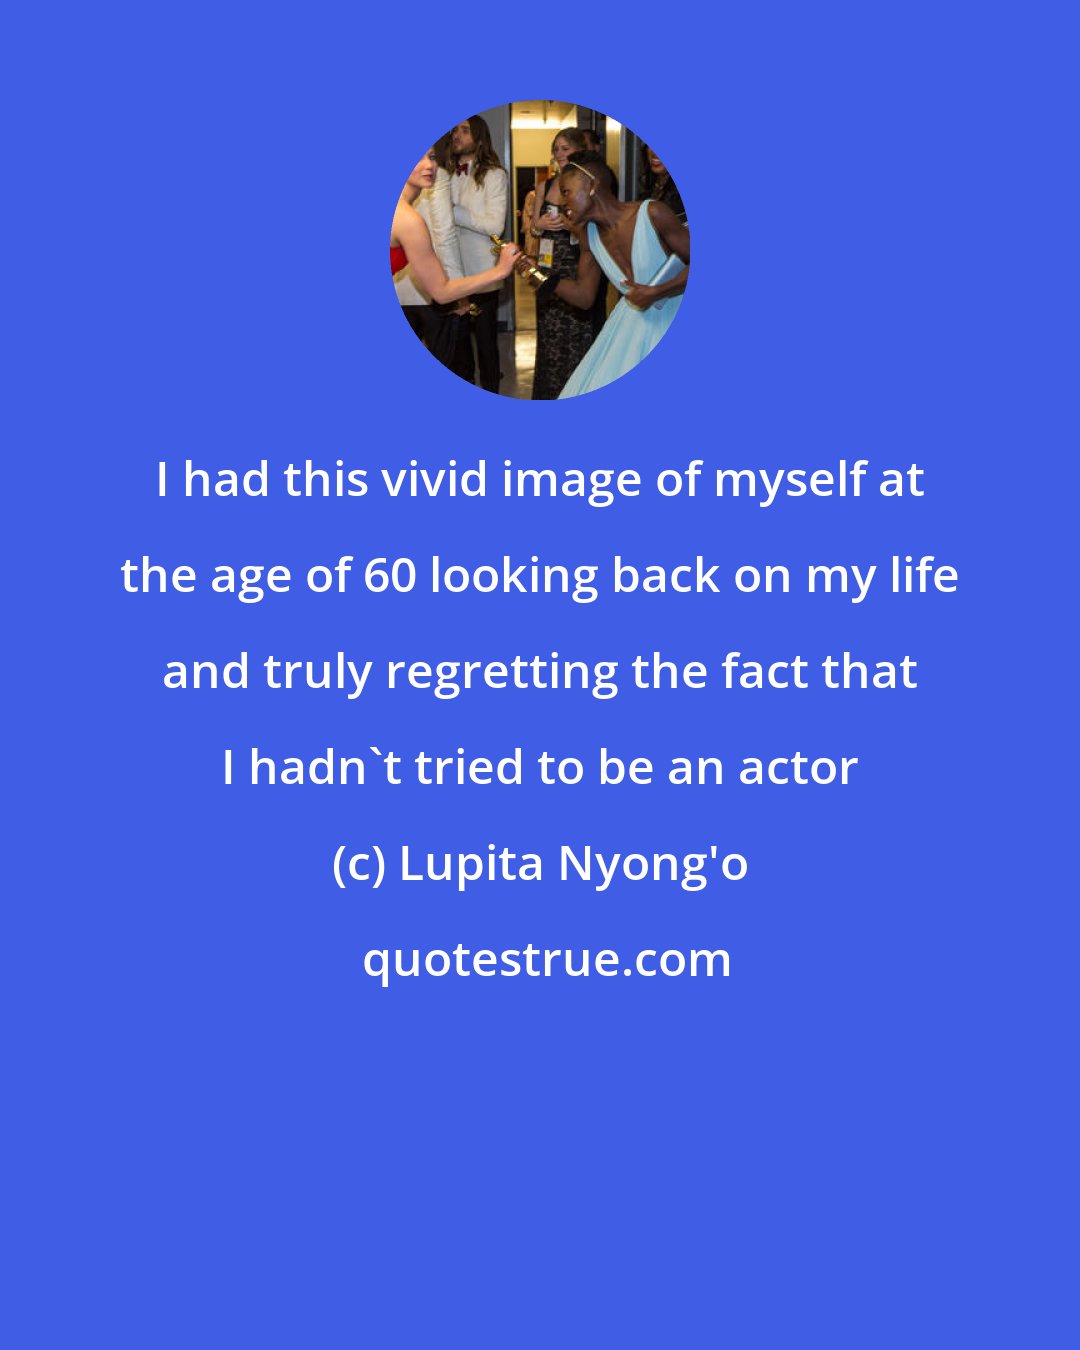 Lupita Nyong'o: I had this vivid image of myself at the age of 60 looking back on my life and truly regretting the fact that I hadn't tried to be an actor